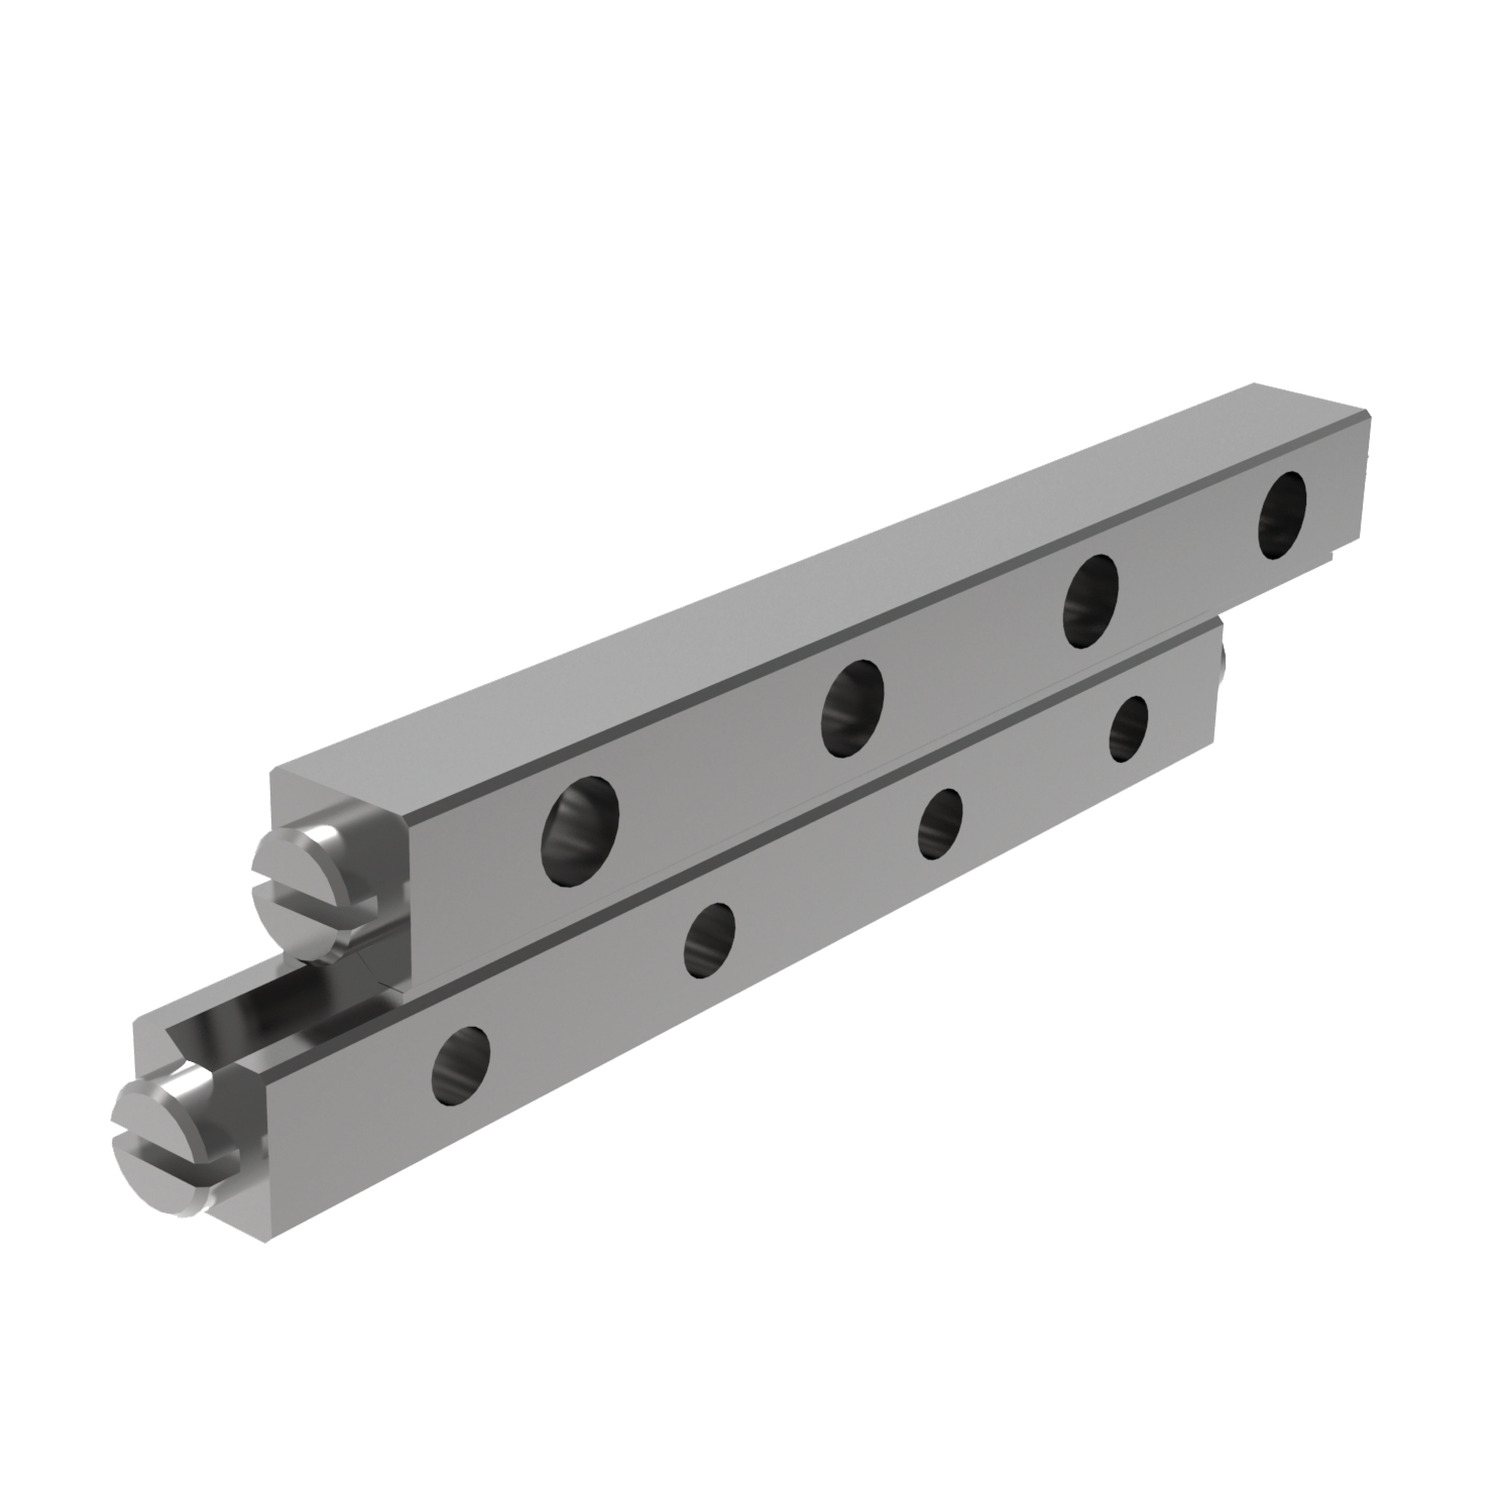 L1001 Stainless Crossed Roller Rail Sets